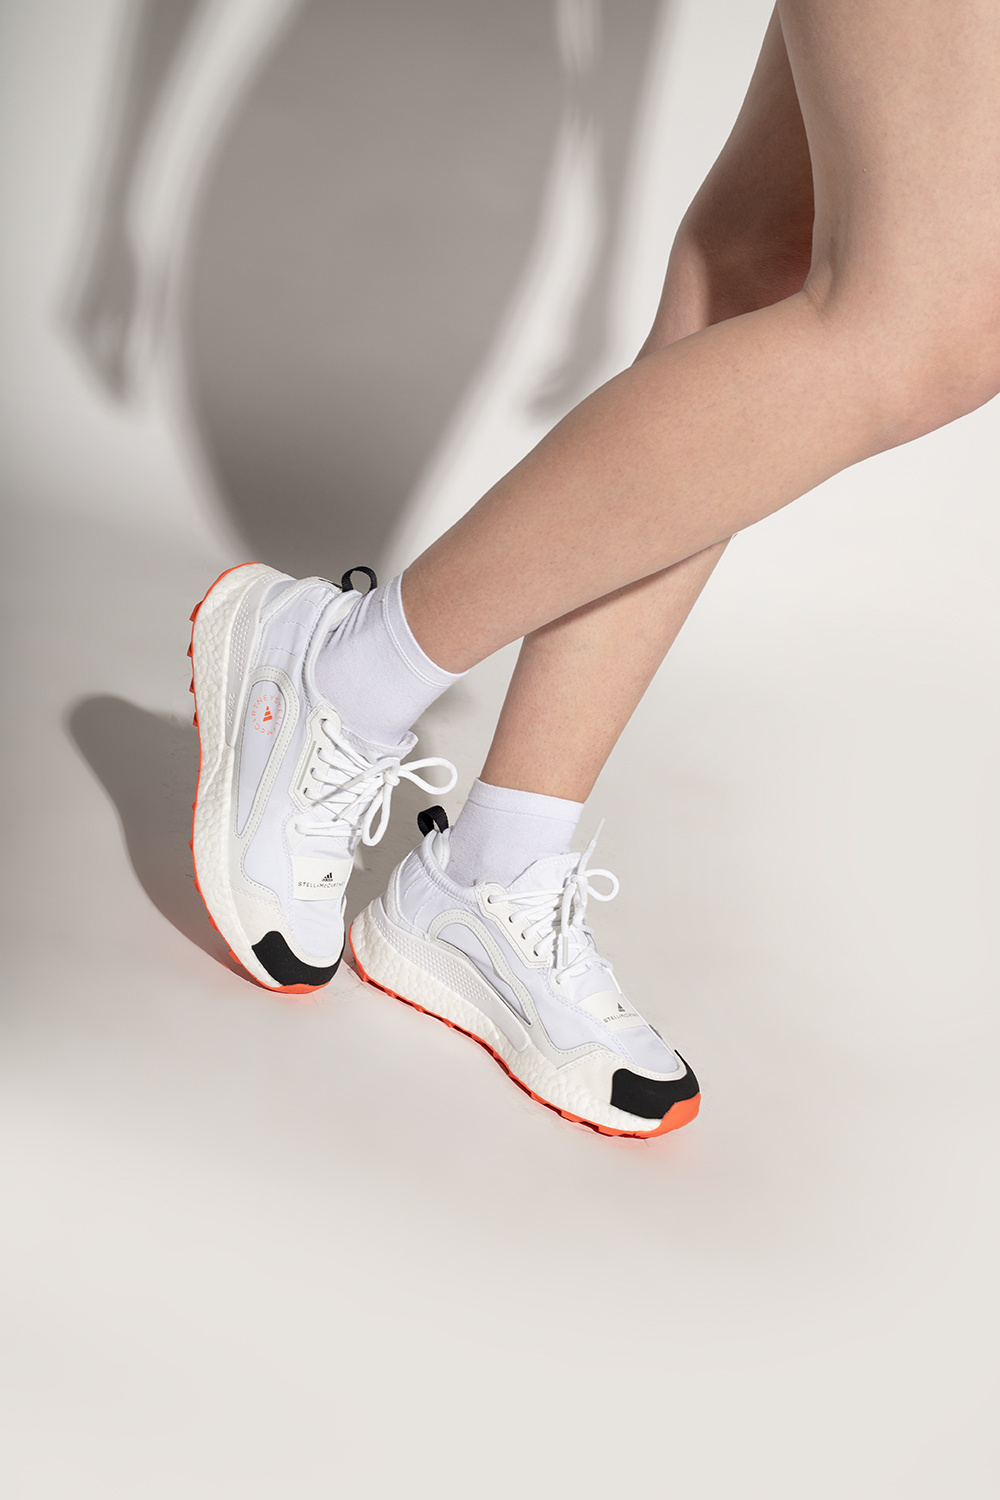 adidas illinois by Stella McCartney ‘Outdoor Boost 2.0 Light’ running shoes